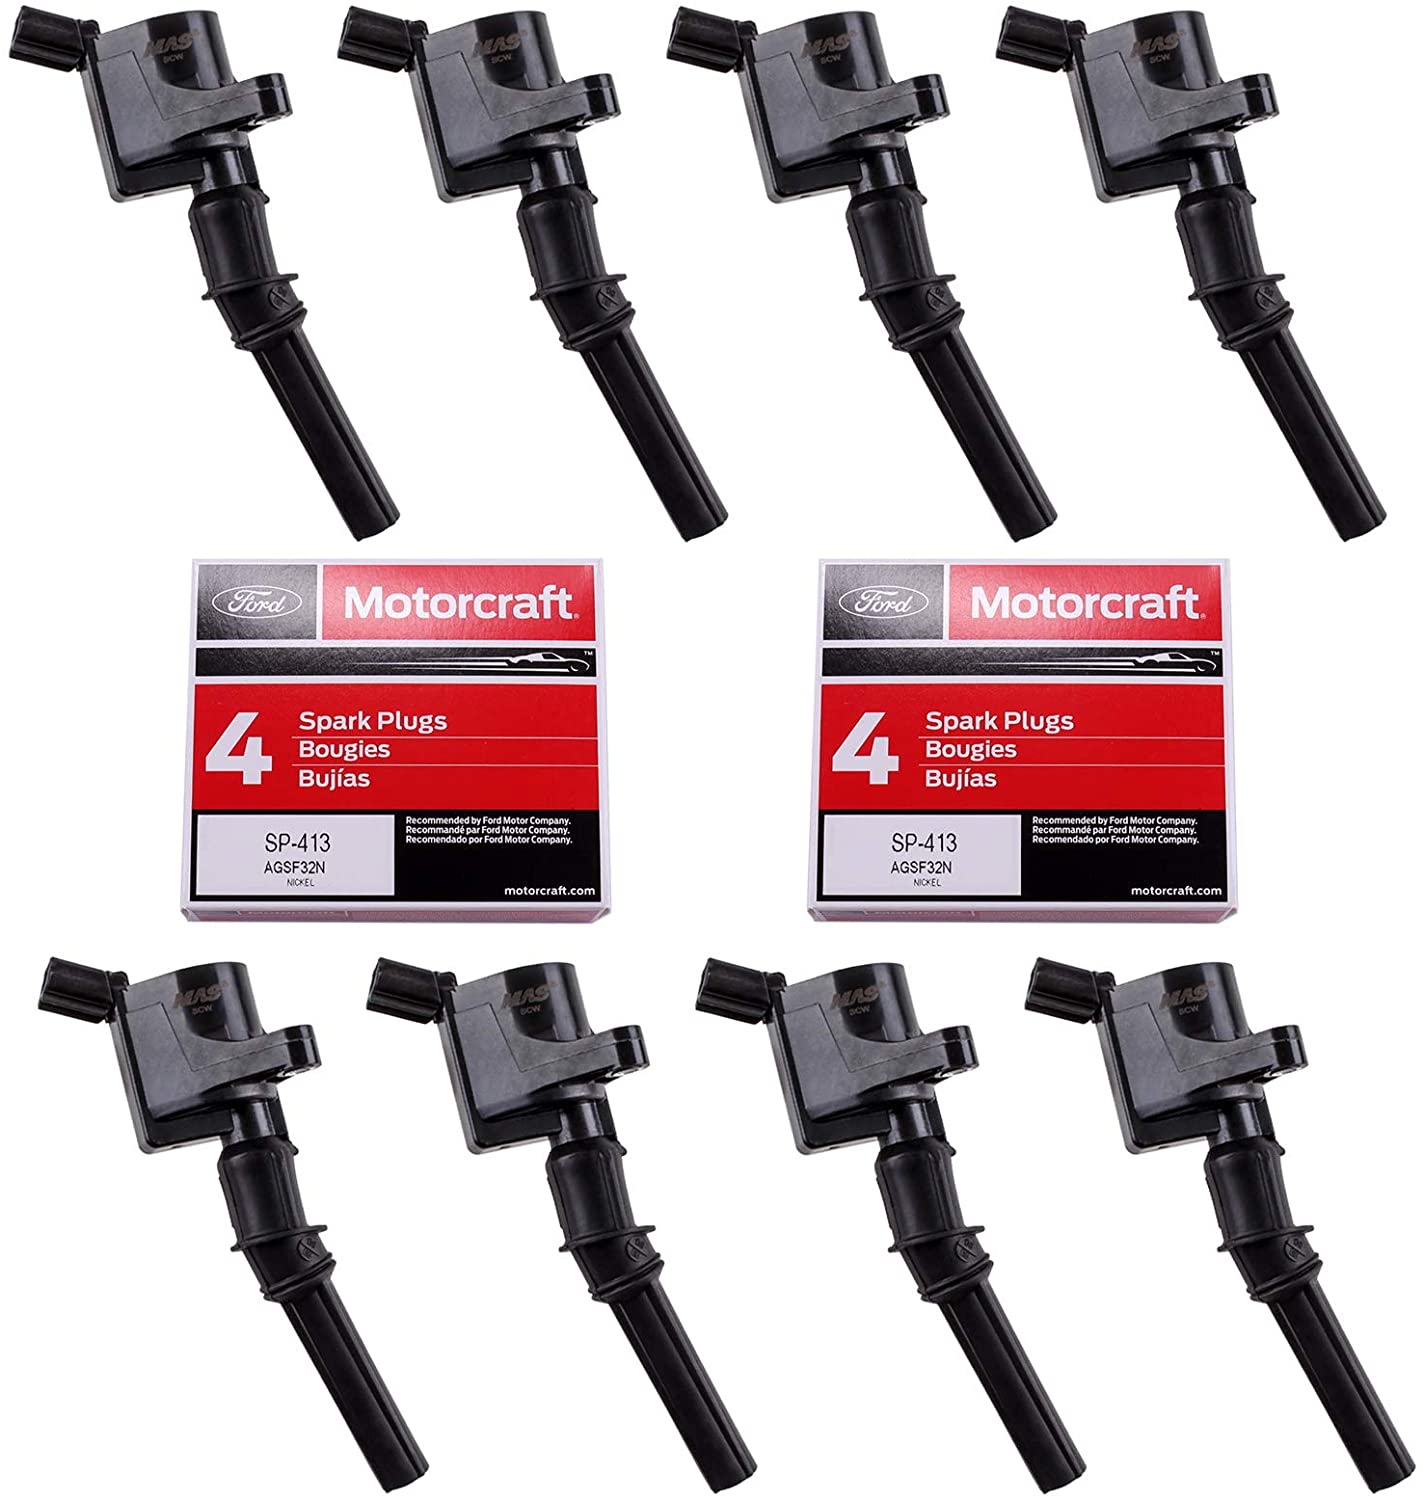 MAS Ignition Coils DG508 and OEM Spark Plugs SP413 Compatible with Ford F-150 Mustang V8 4.6L pack of 8